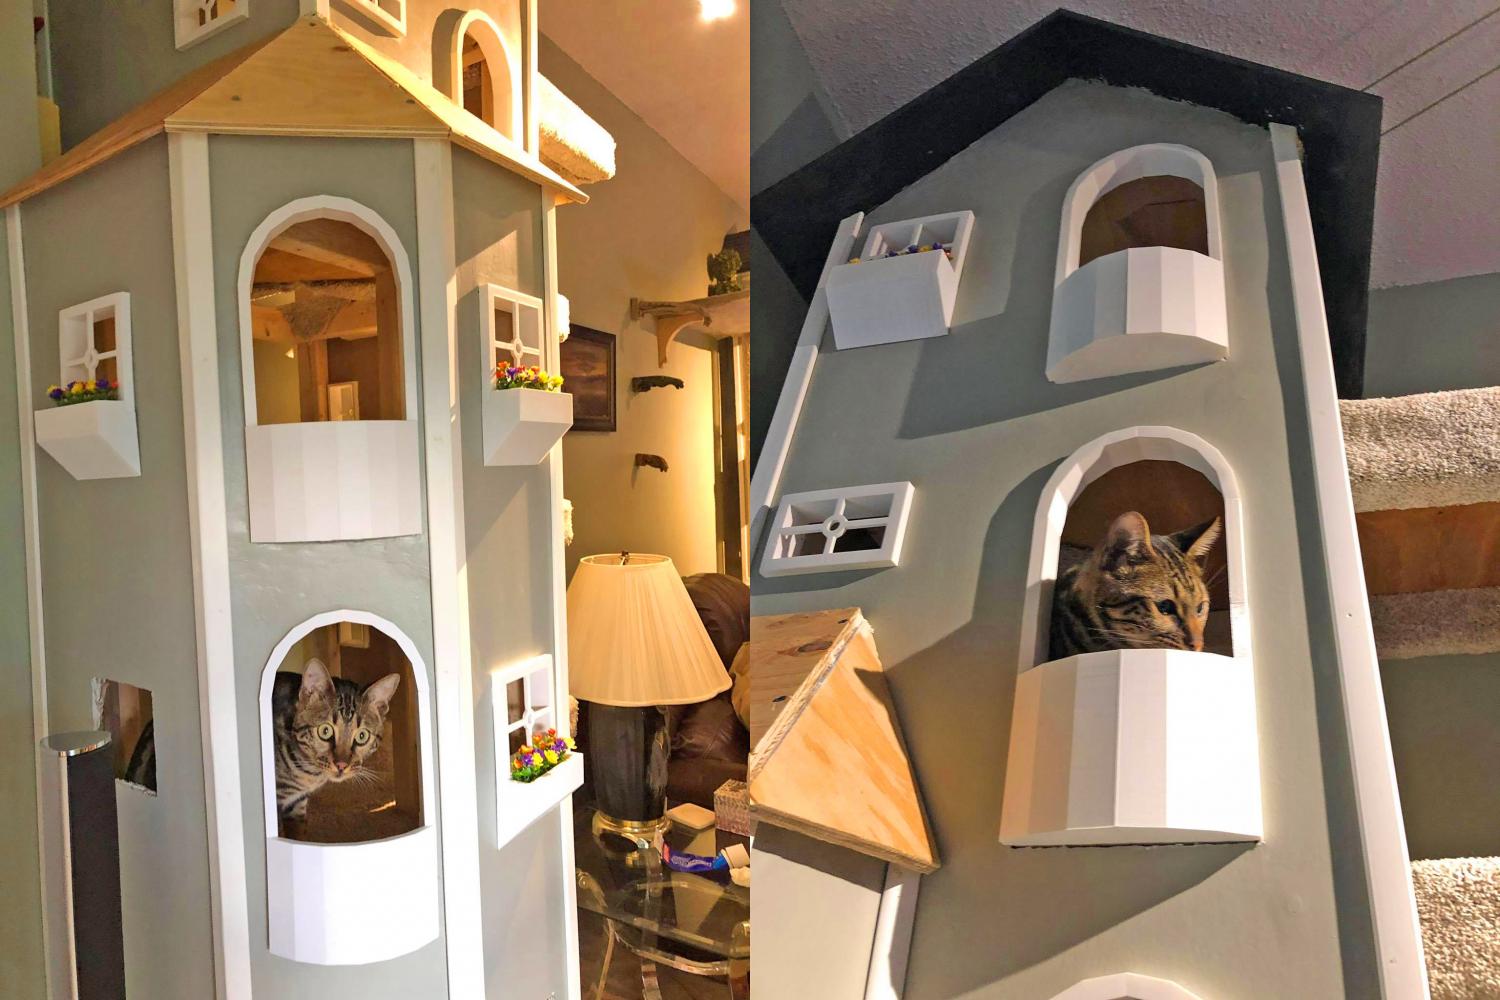 Incredible Cat Towers With Connecting Bridge - The Ultimate Cat Playhouse Detailed Cat Towers